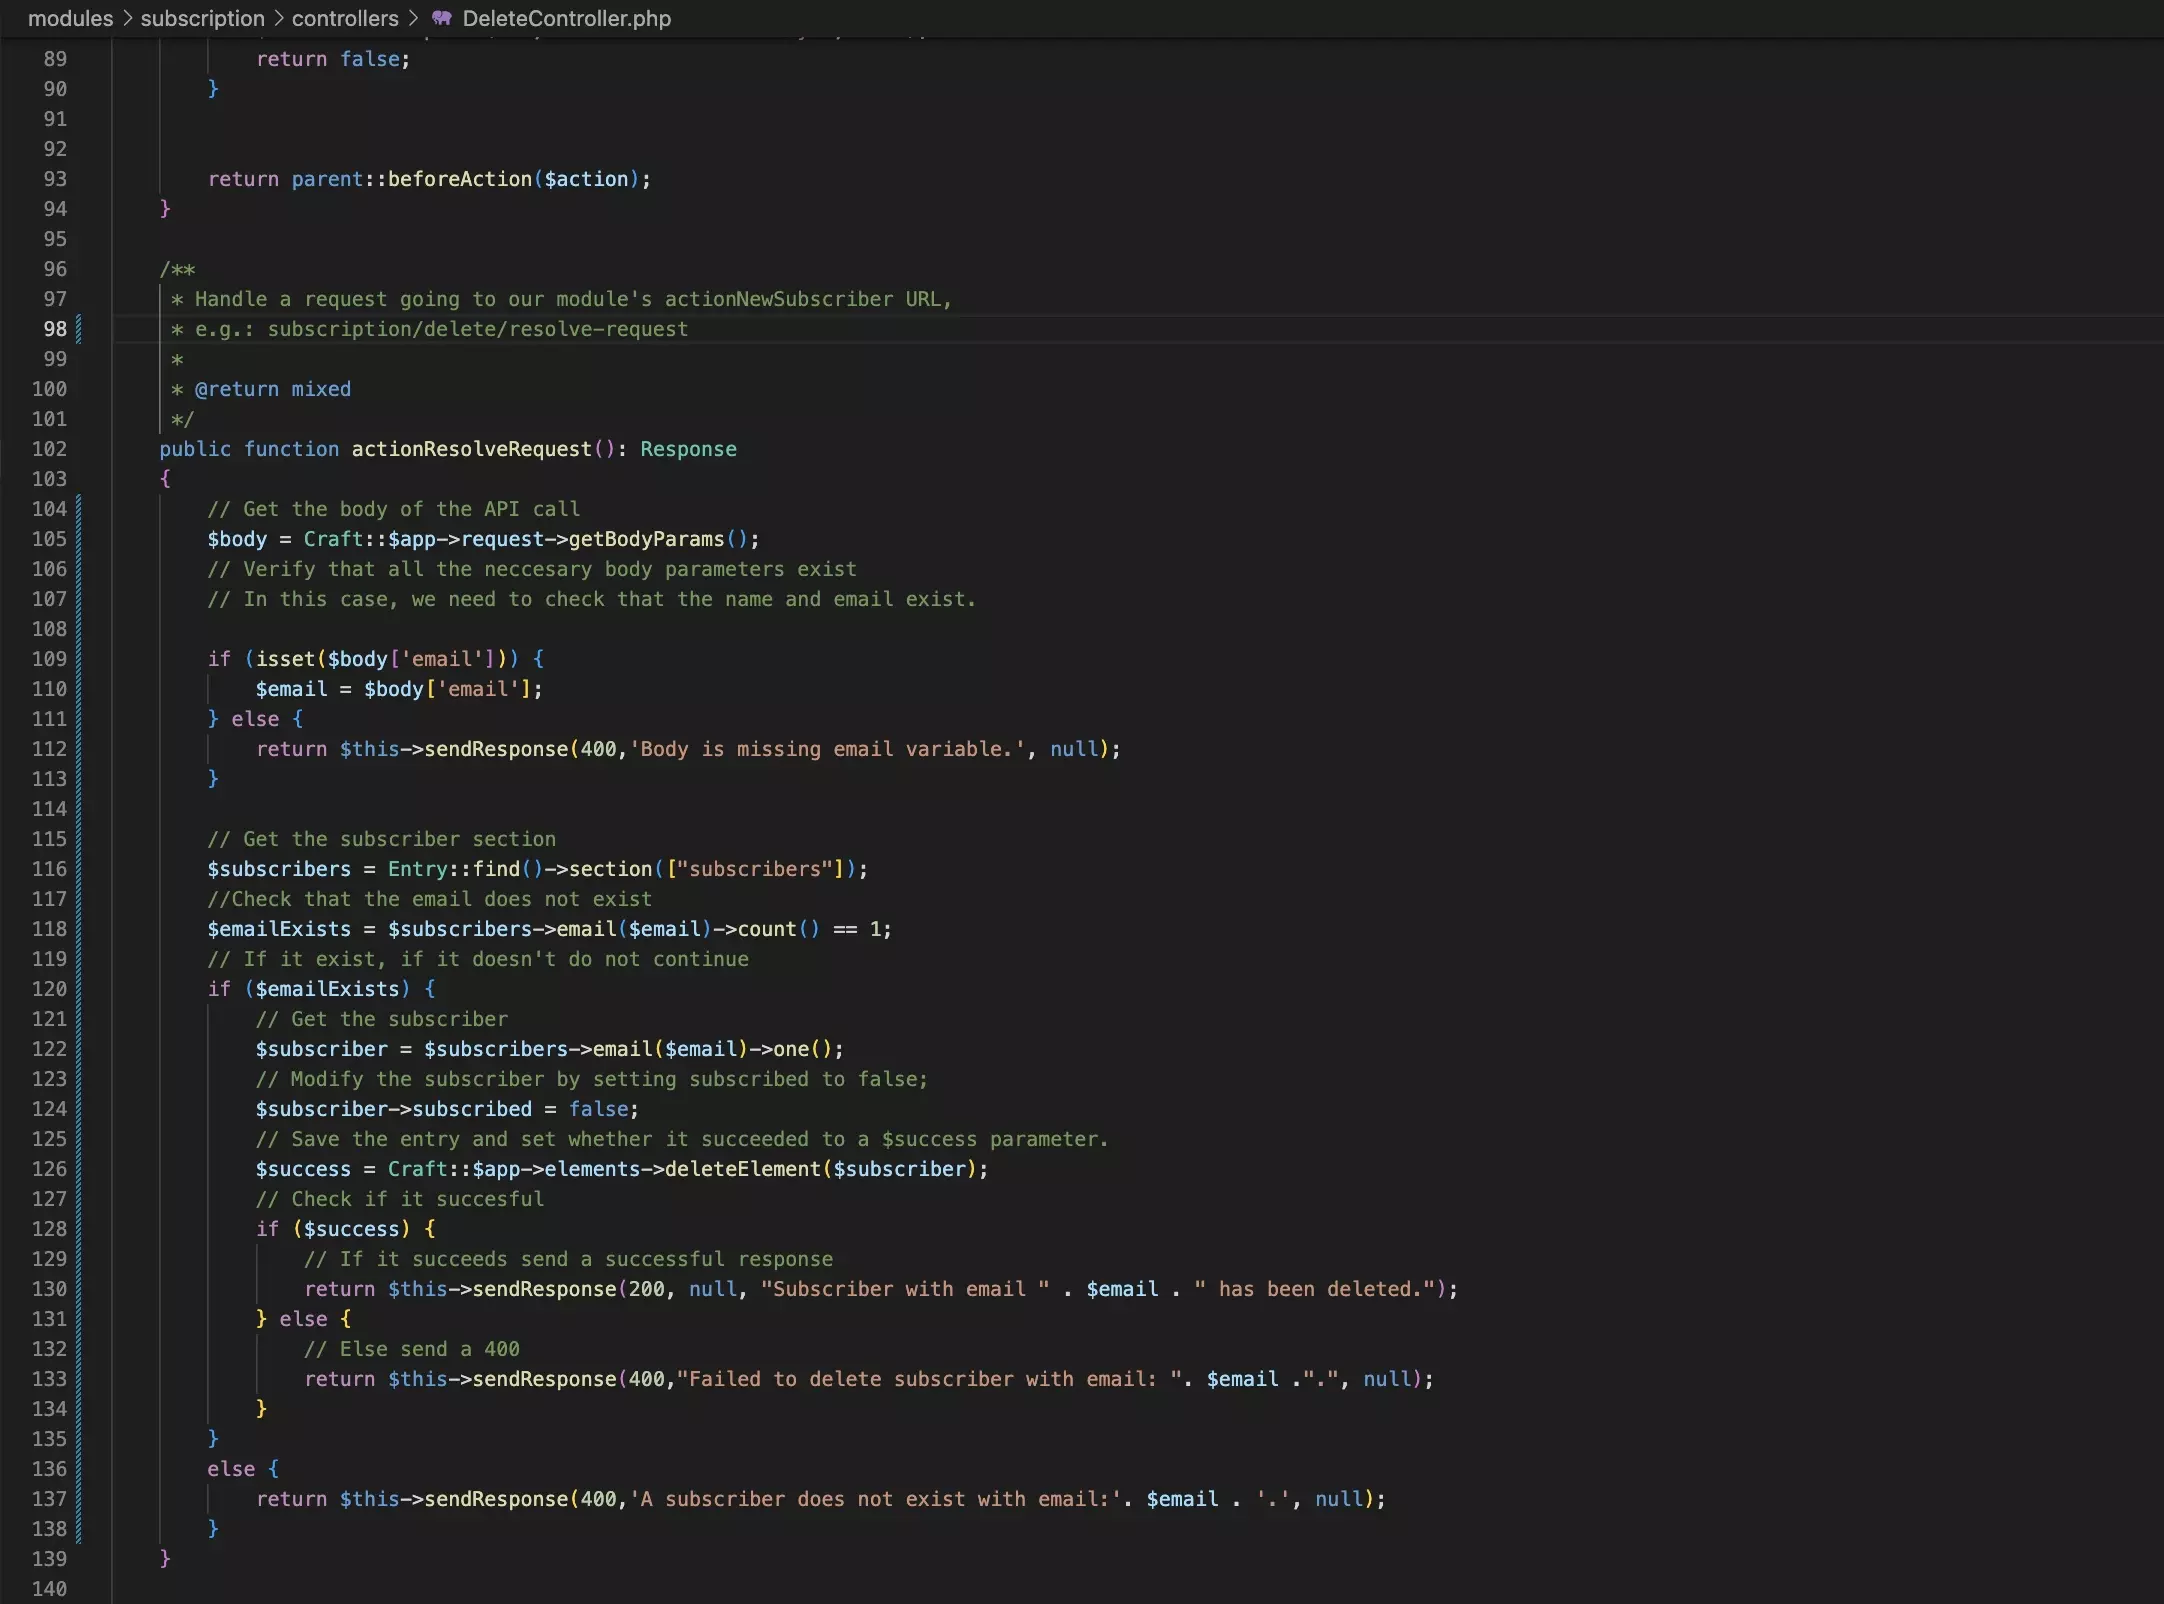 A screenshot of VSCode showing the DeleteController code. The full sample is provided below.